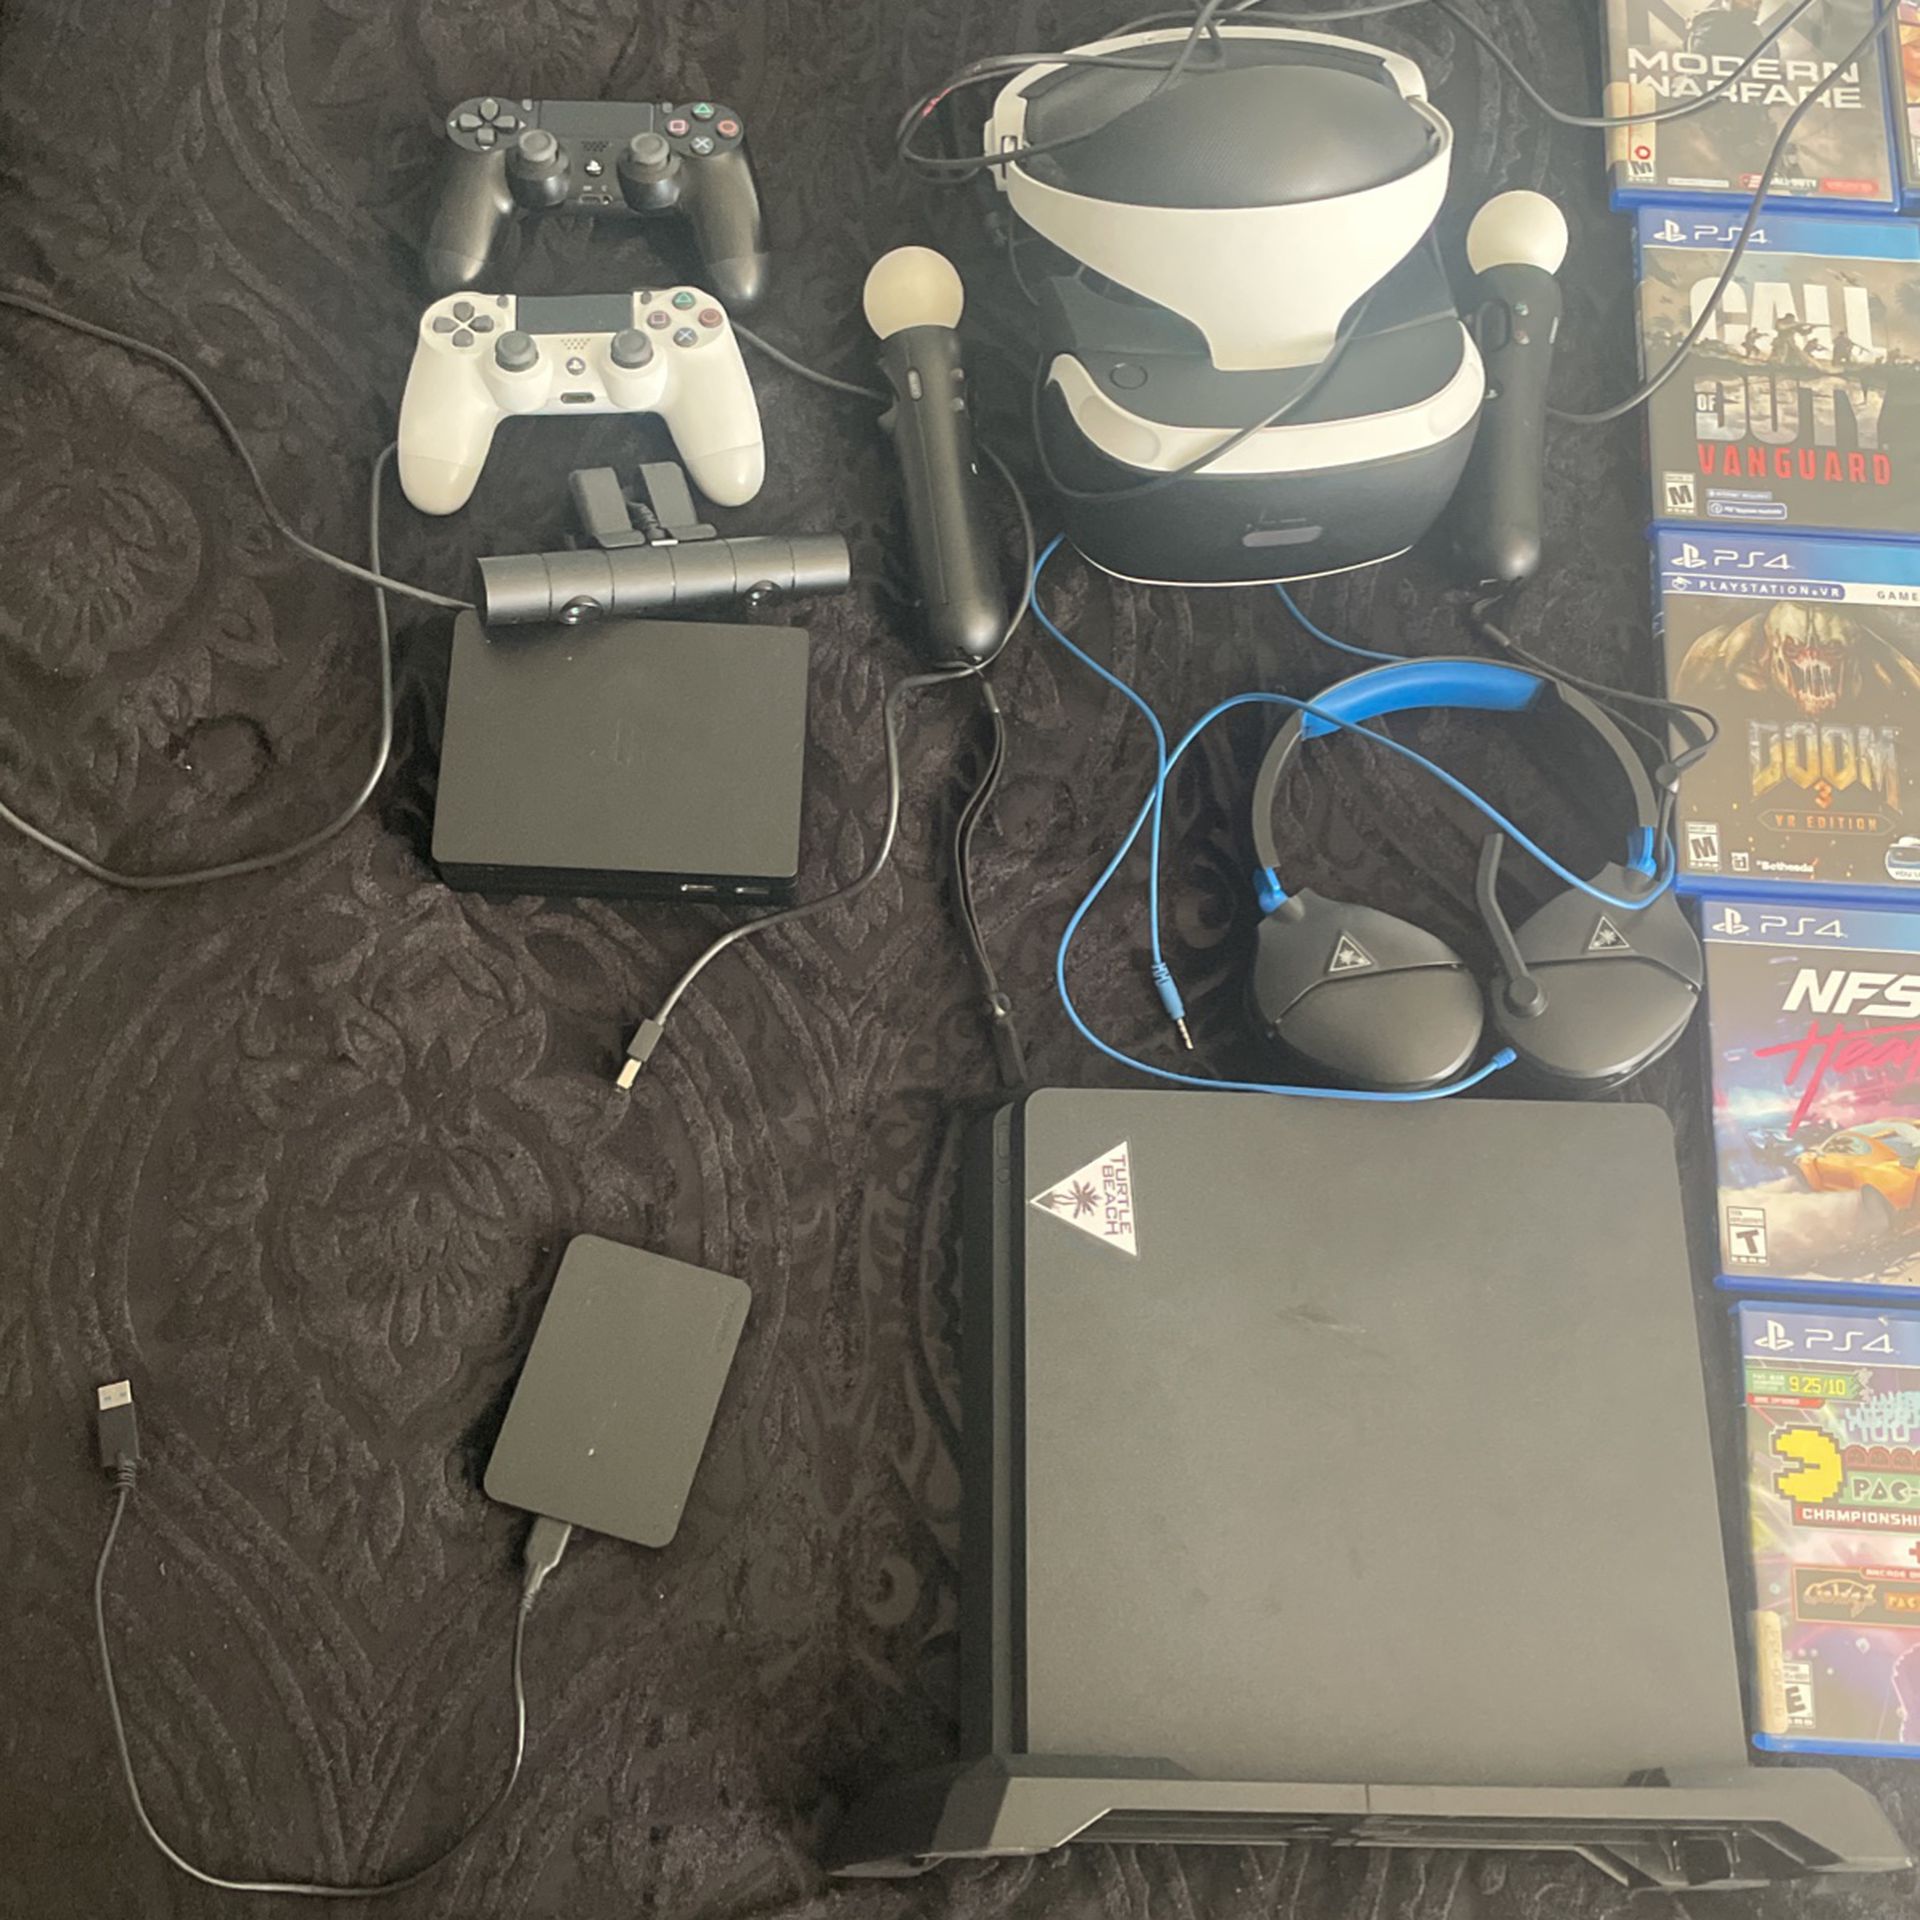 PS4 Slim/ PsVR AND GAMES WITH A 1TB EXTERNAL HARDDRIVE 